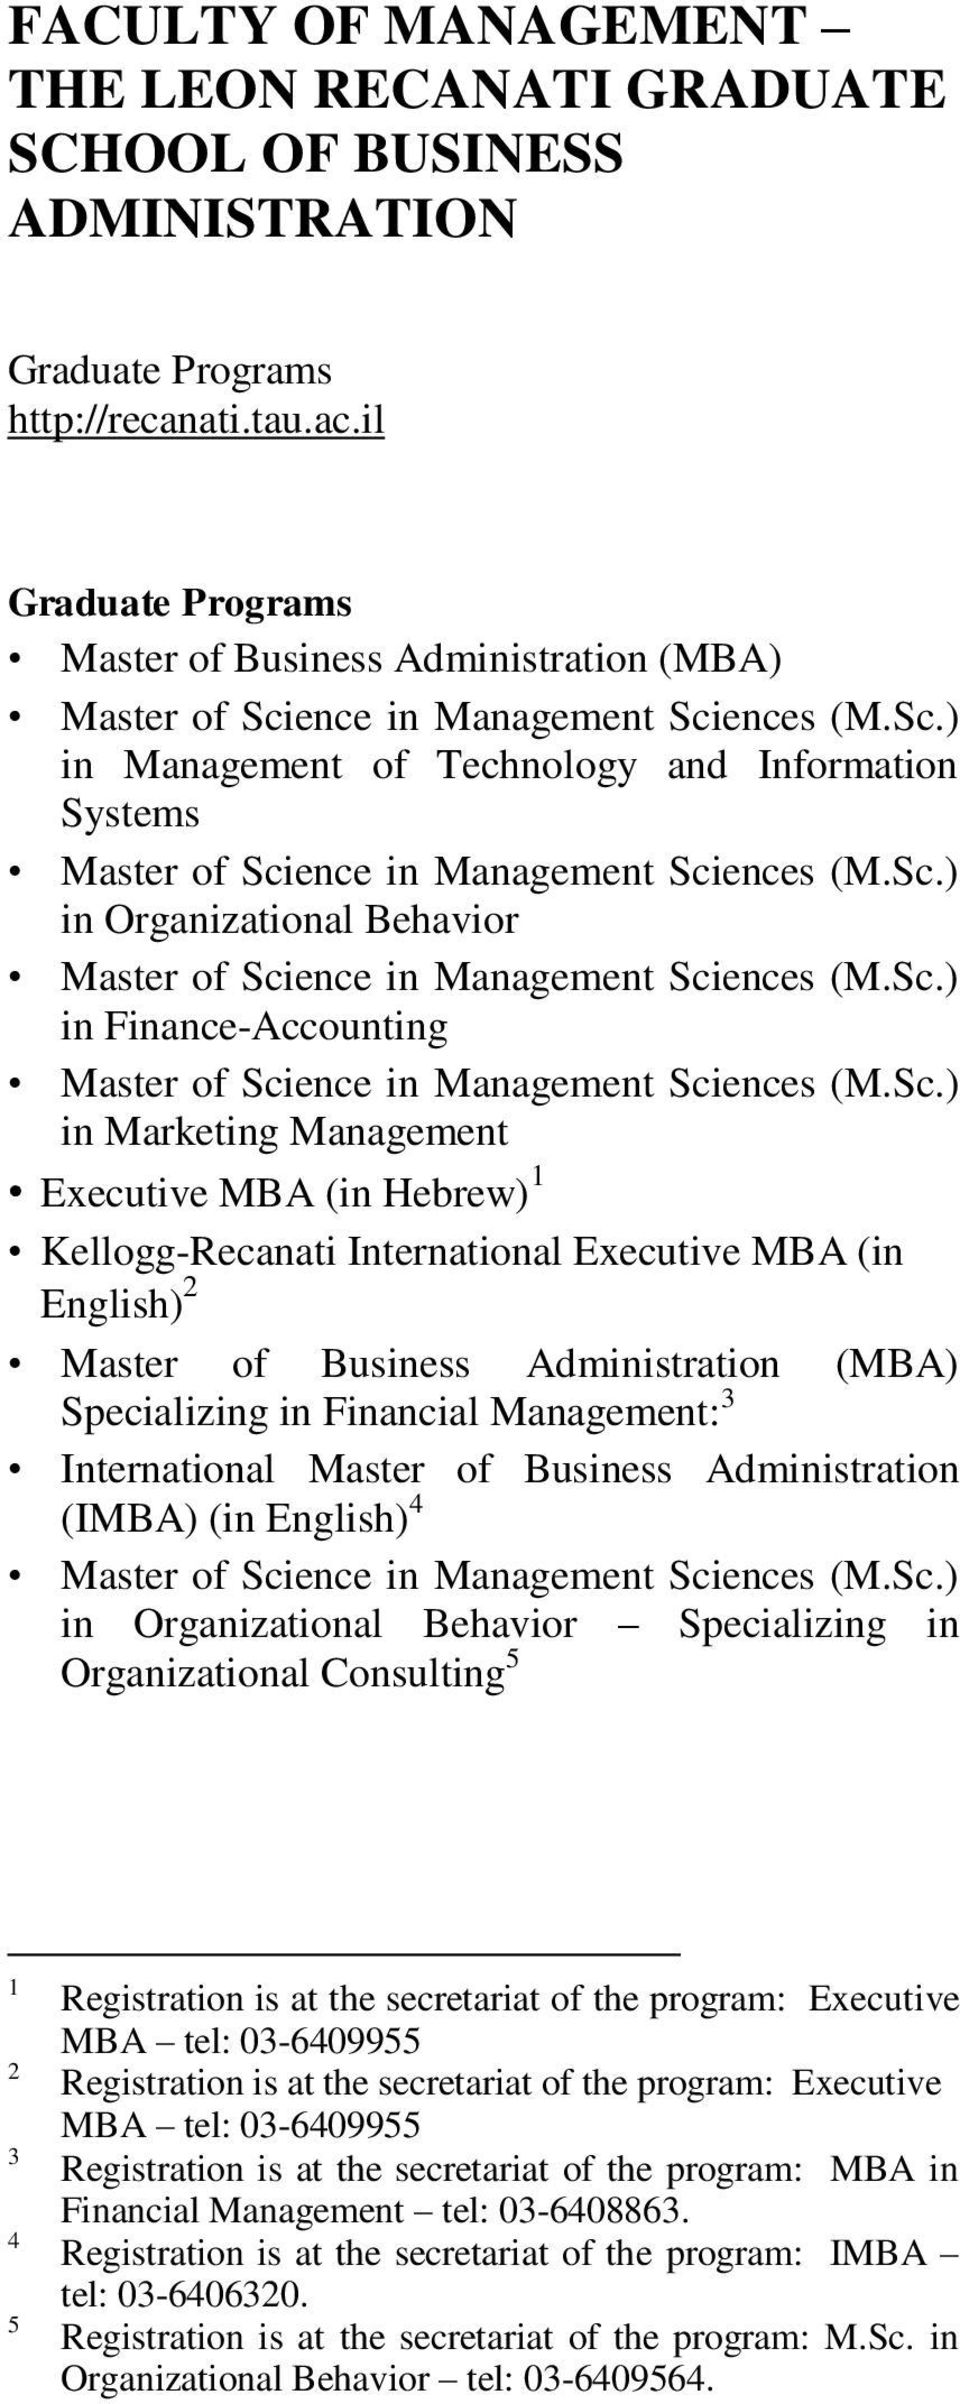 Sc.) in Organizational Behavior Master of Science in Management Sciences (M.Sc.) in Finance-Accounting Master of Science in Management Sciences (M.Sc.) in Marketing Management Executive MBA (in